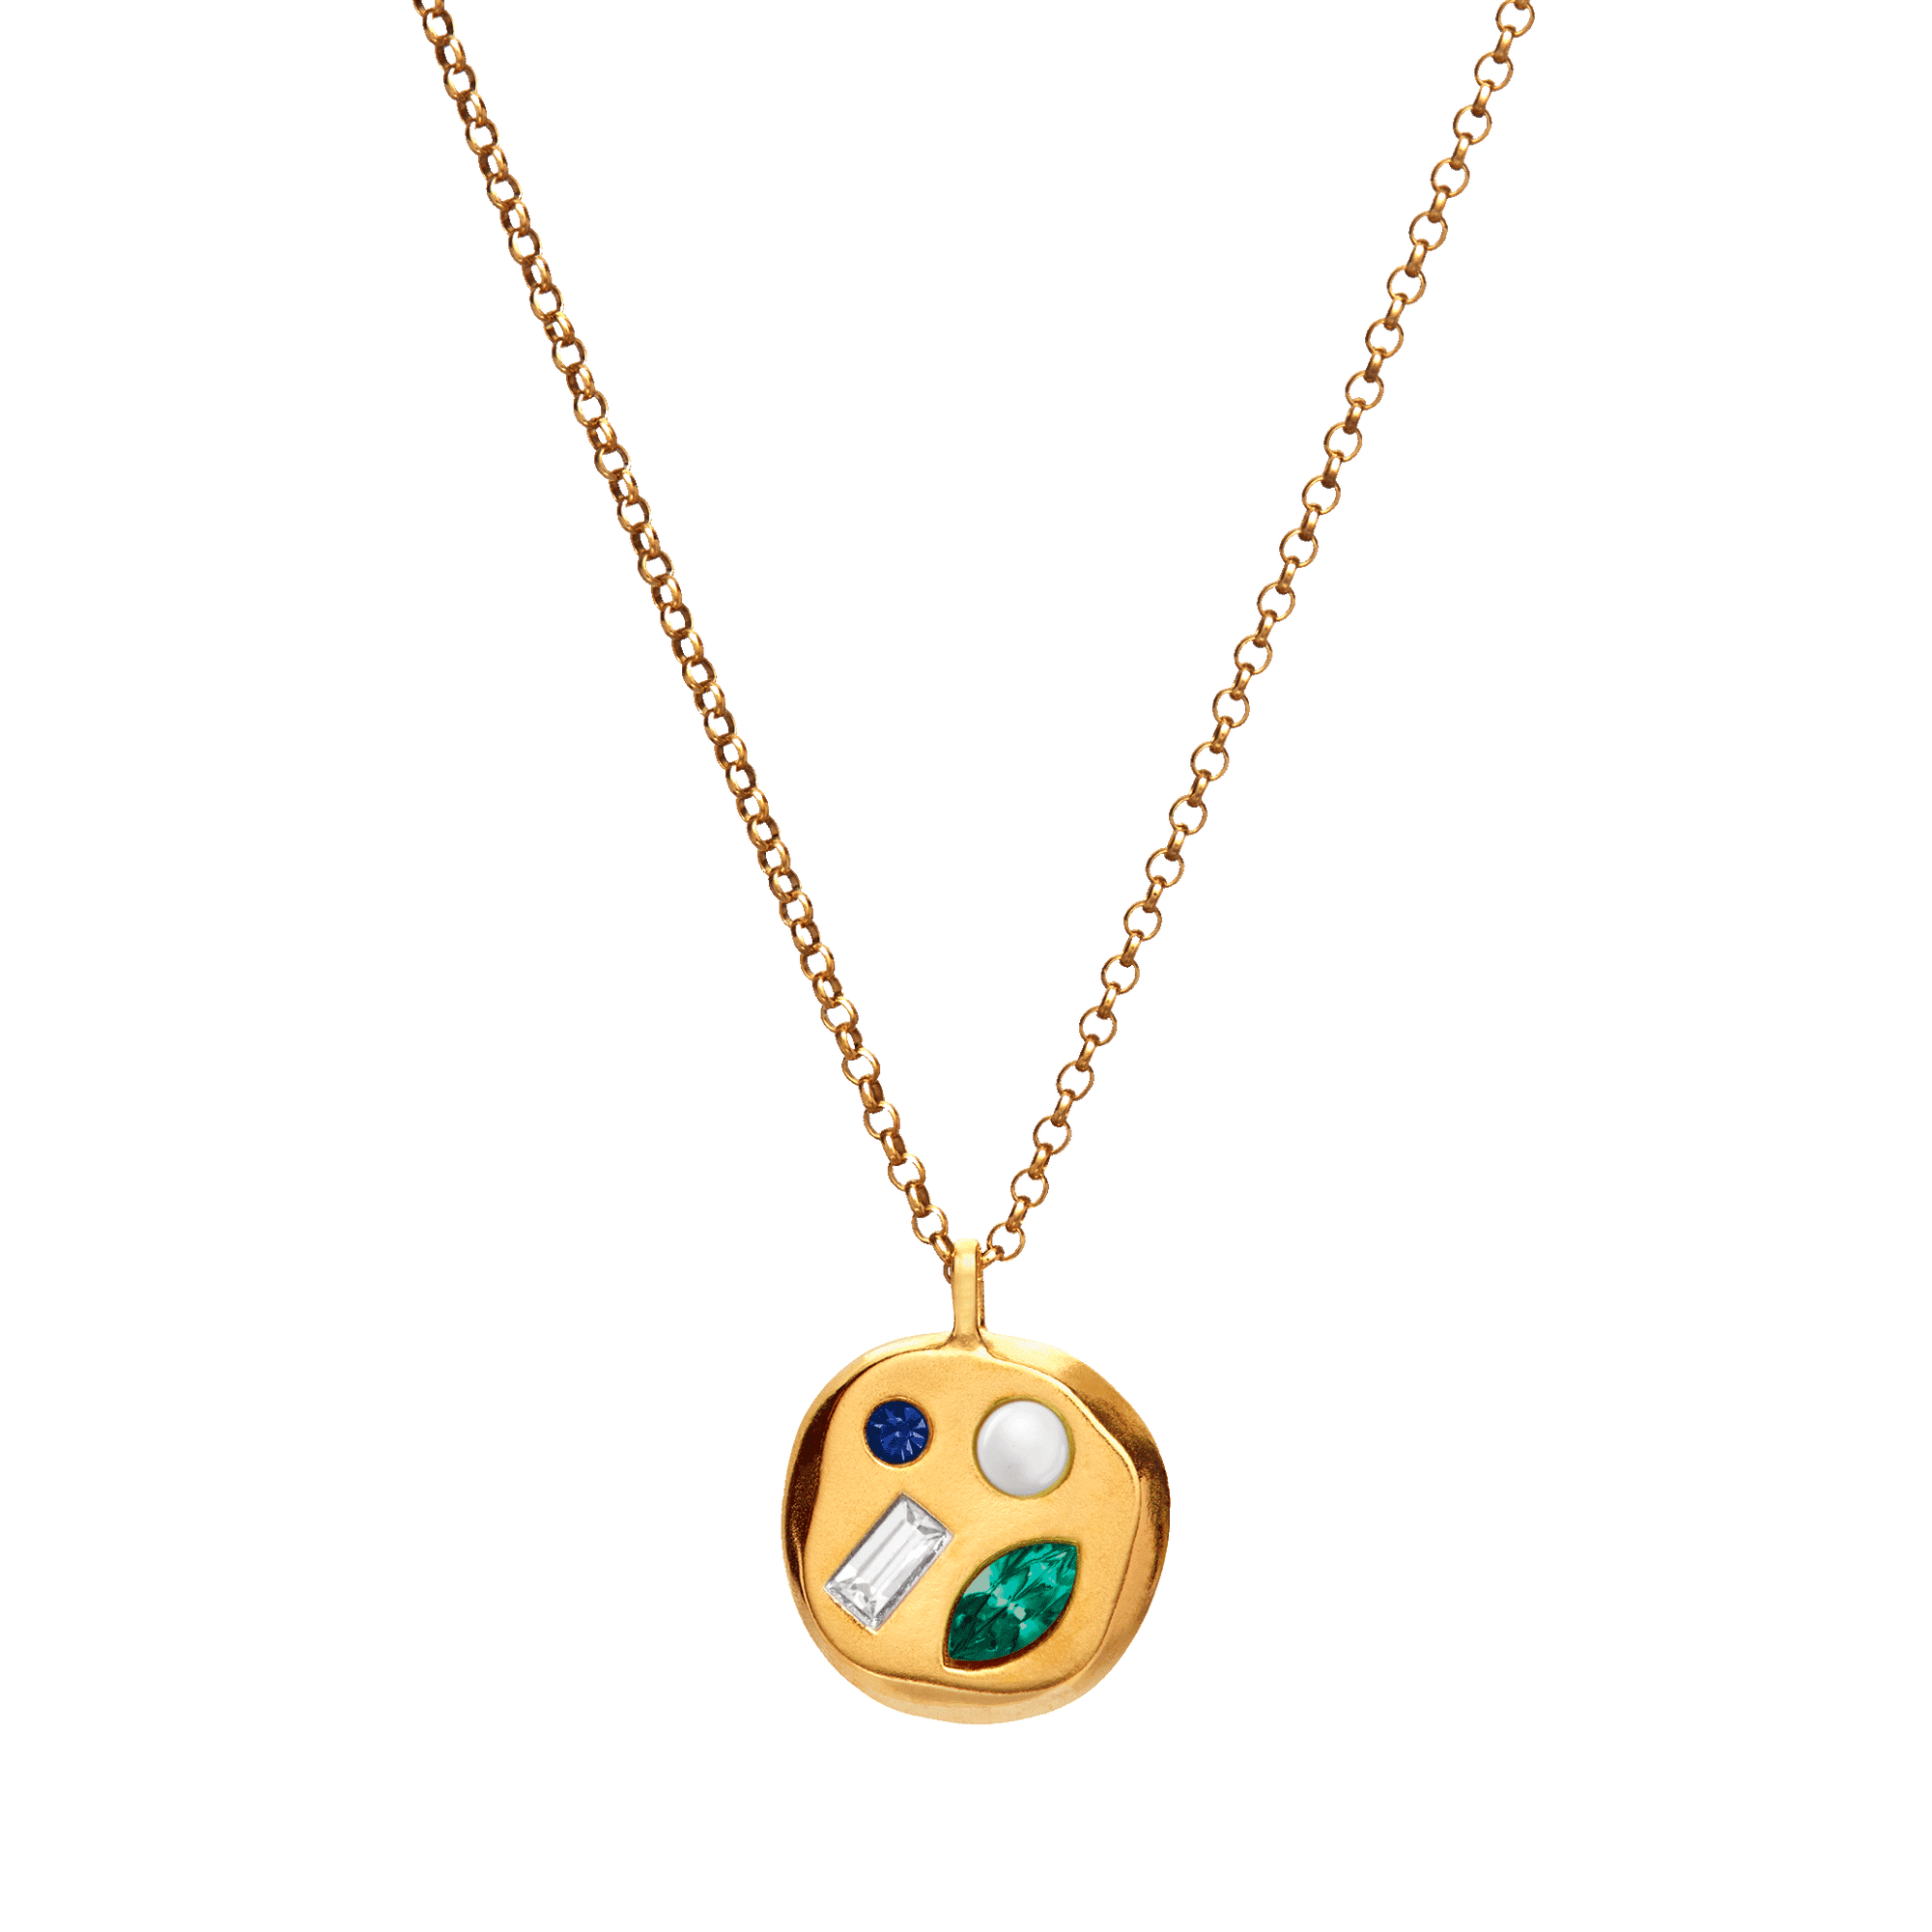 The May Second Pendant